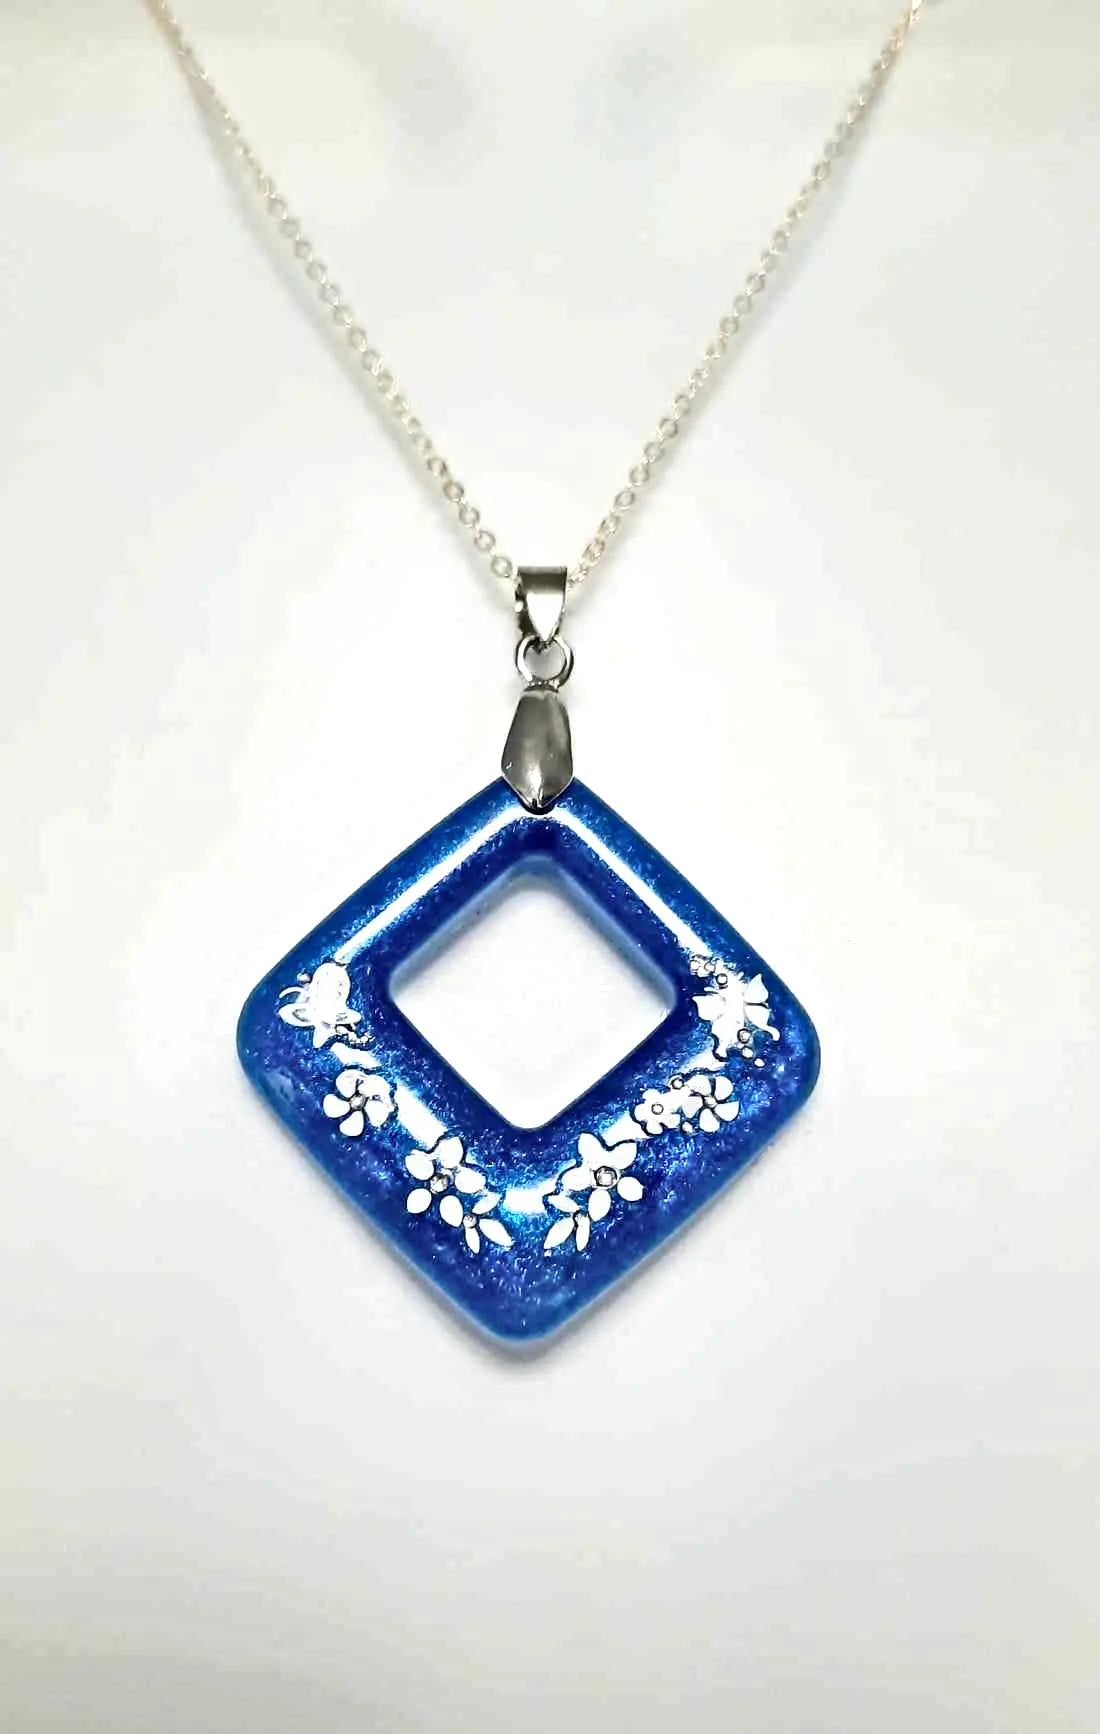 Blue Resined white flower necklace by Josie - Image #1